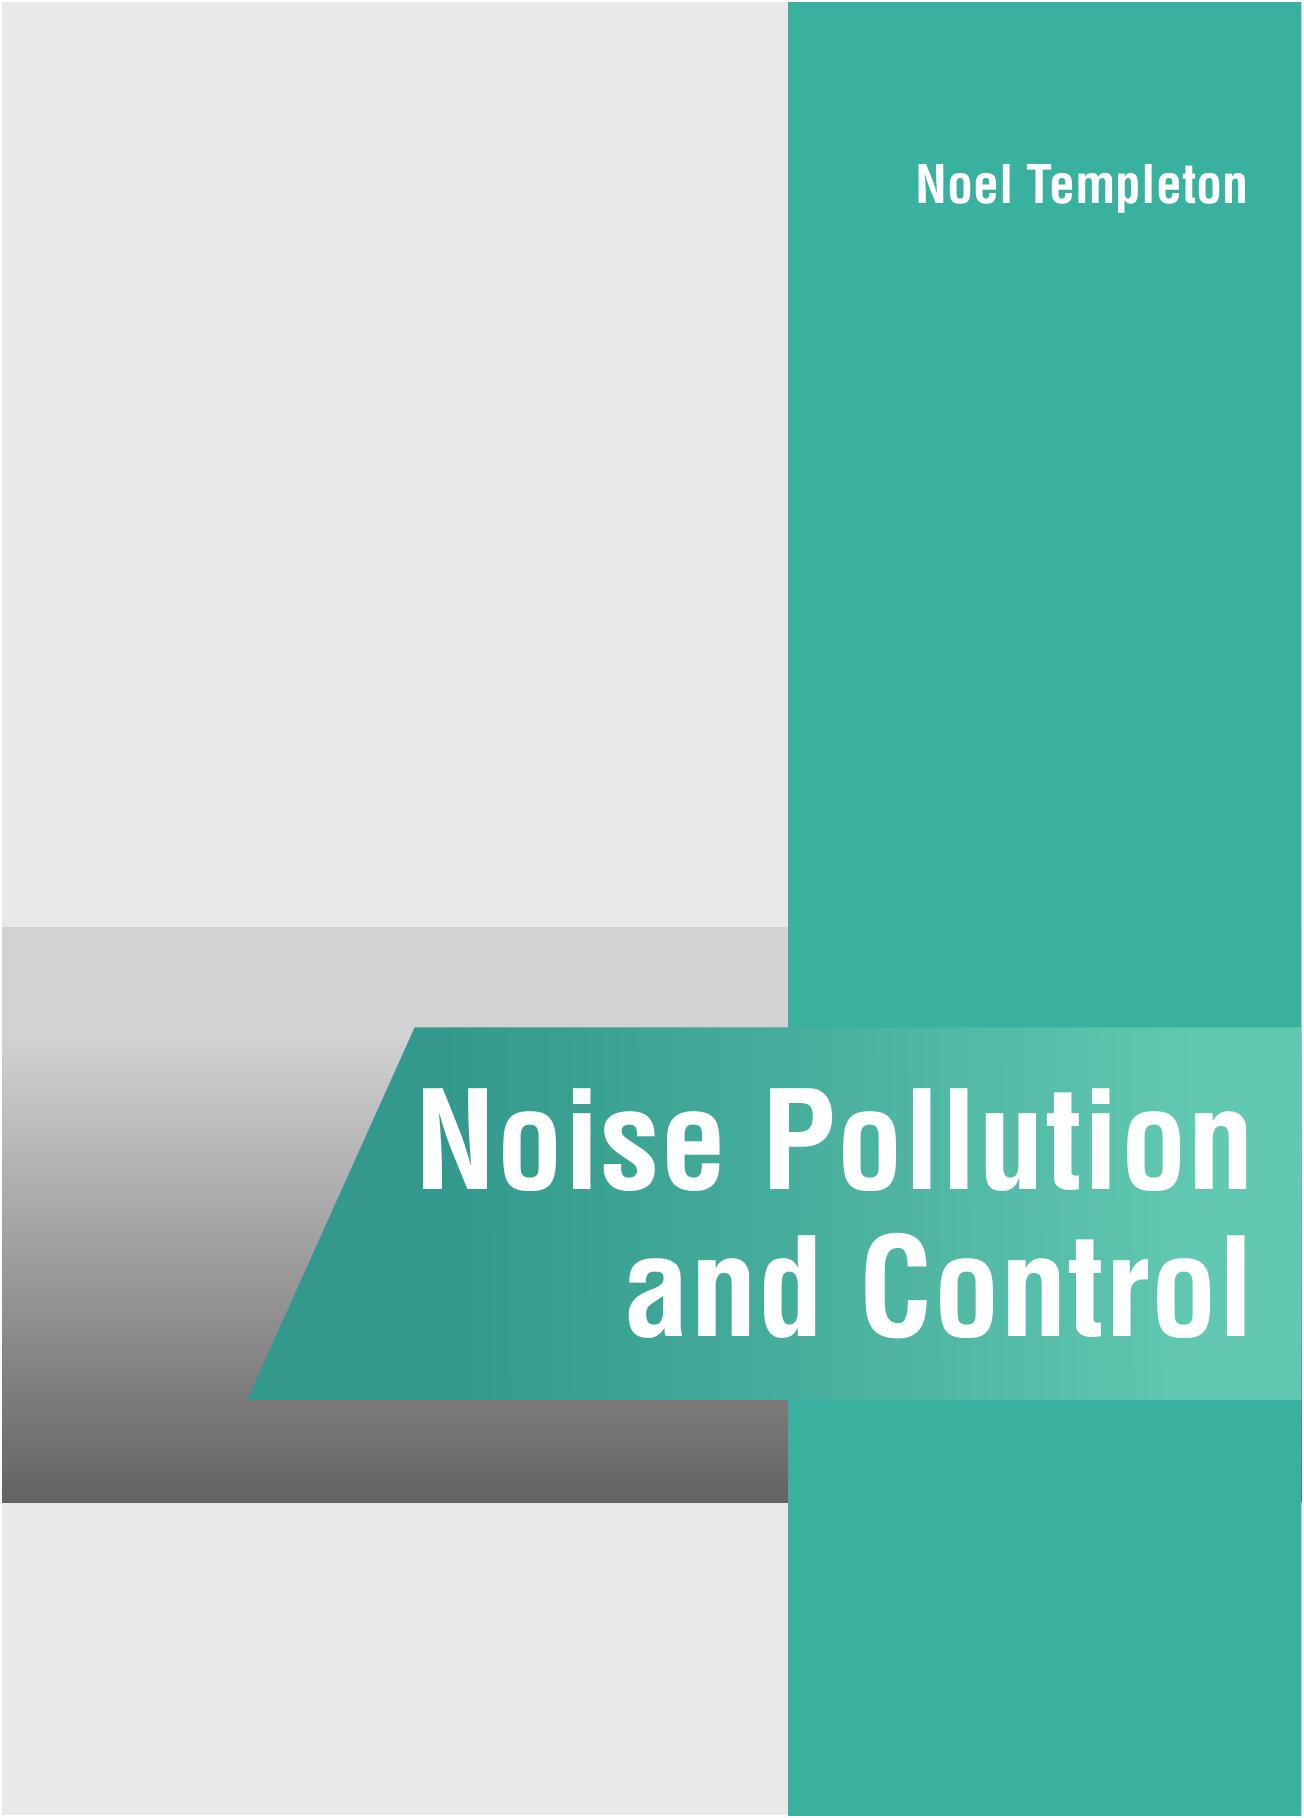 Noise Pollution and Control 2017